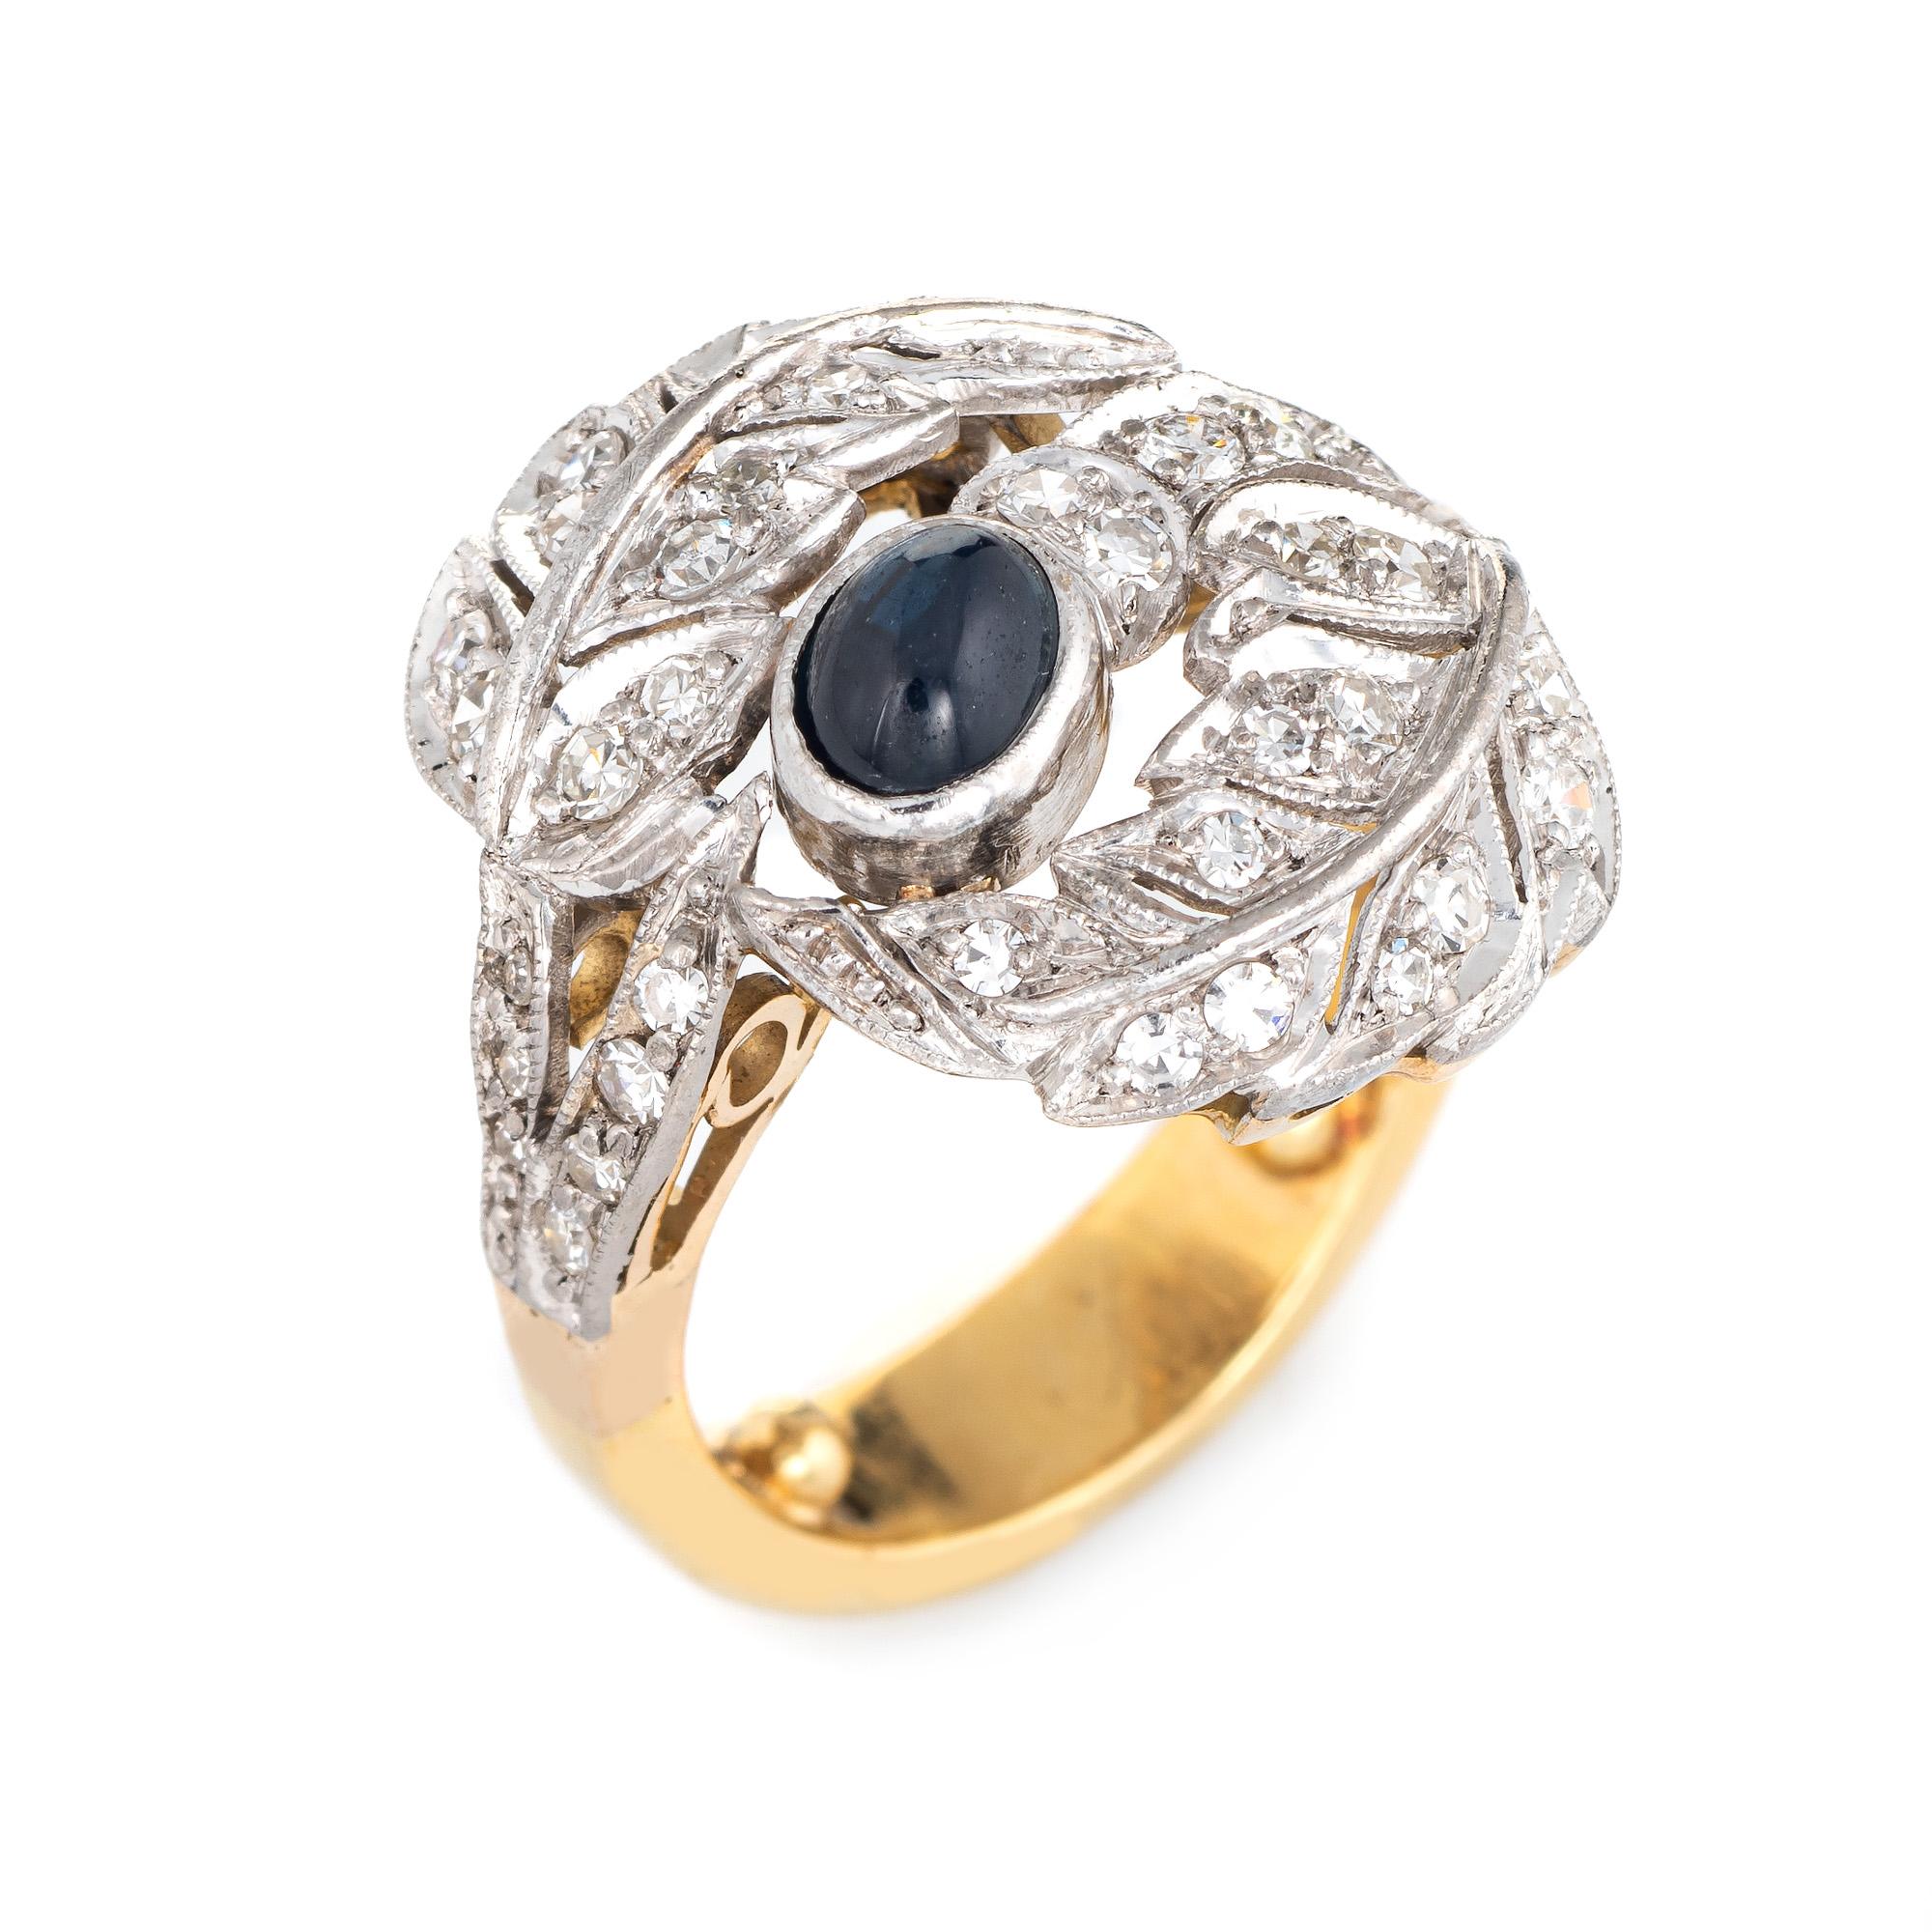 Stylish vintage sapphire & diamond leaf ring (circa 1950s to 1960s) crafted in 18 karat yellow & white gold. 

Round brilliant & single cut diamonds total an estimated 0.40 carats (estimated at H-I color and VS2-SI2 clarity). The cabochon cut